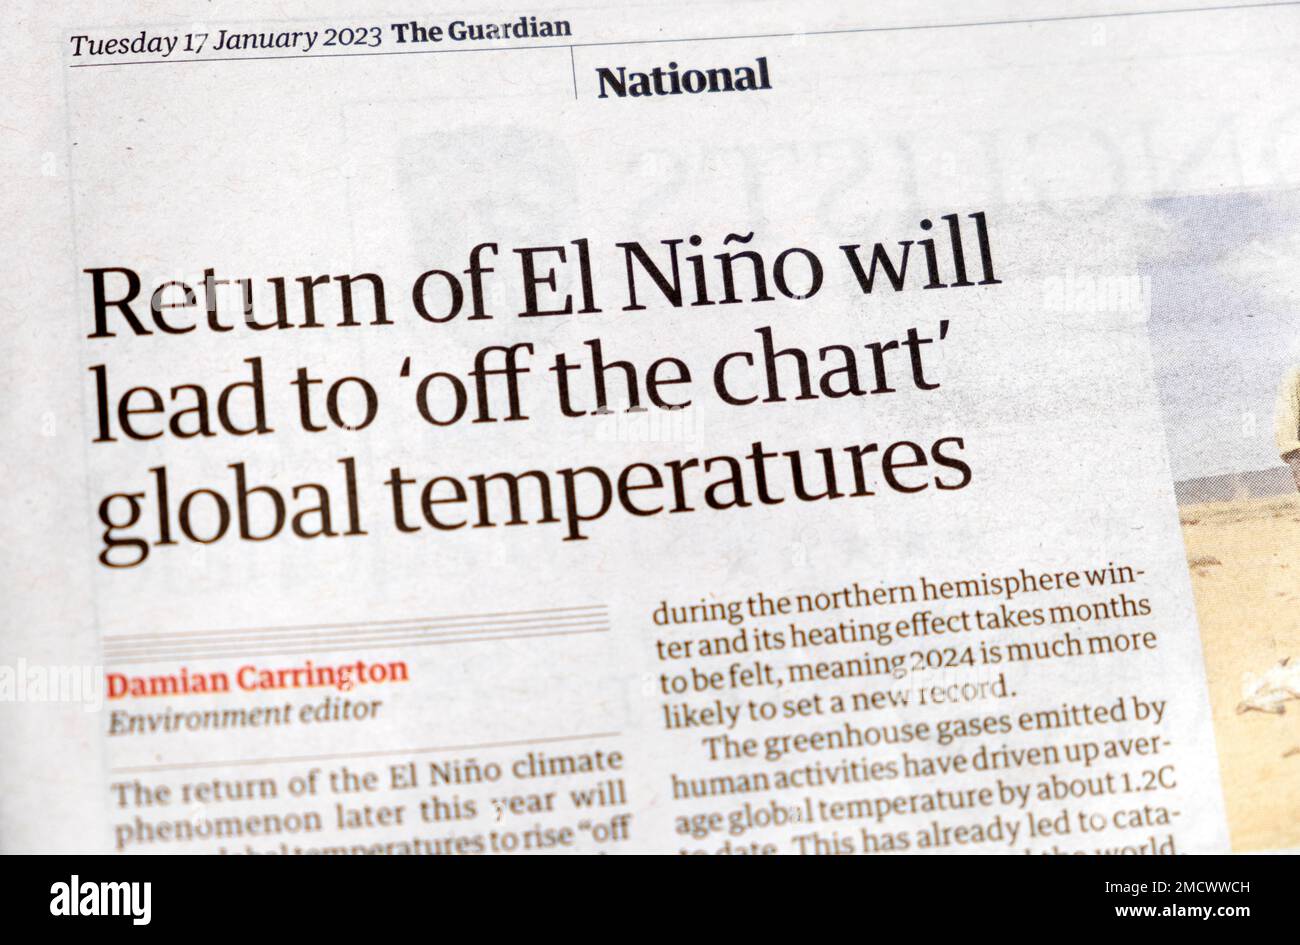 'Return of El Niño will lead to 'off the chart global temperatures' Guardian newspaper headline article clipping cutting 17 January 2023 London UK Stock Photo